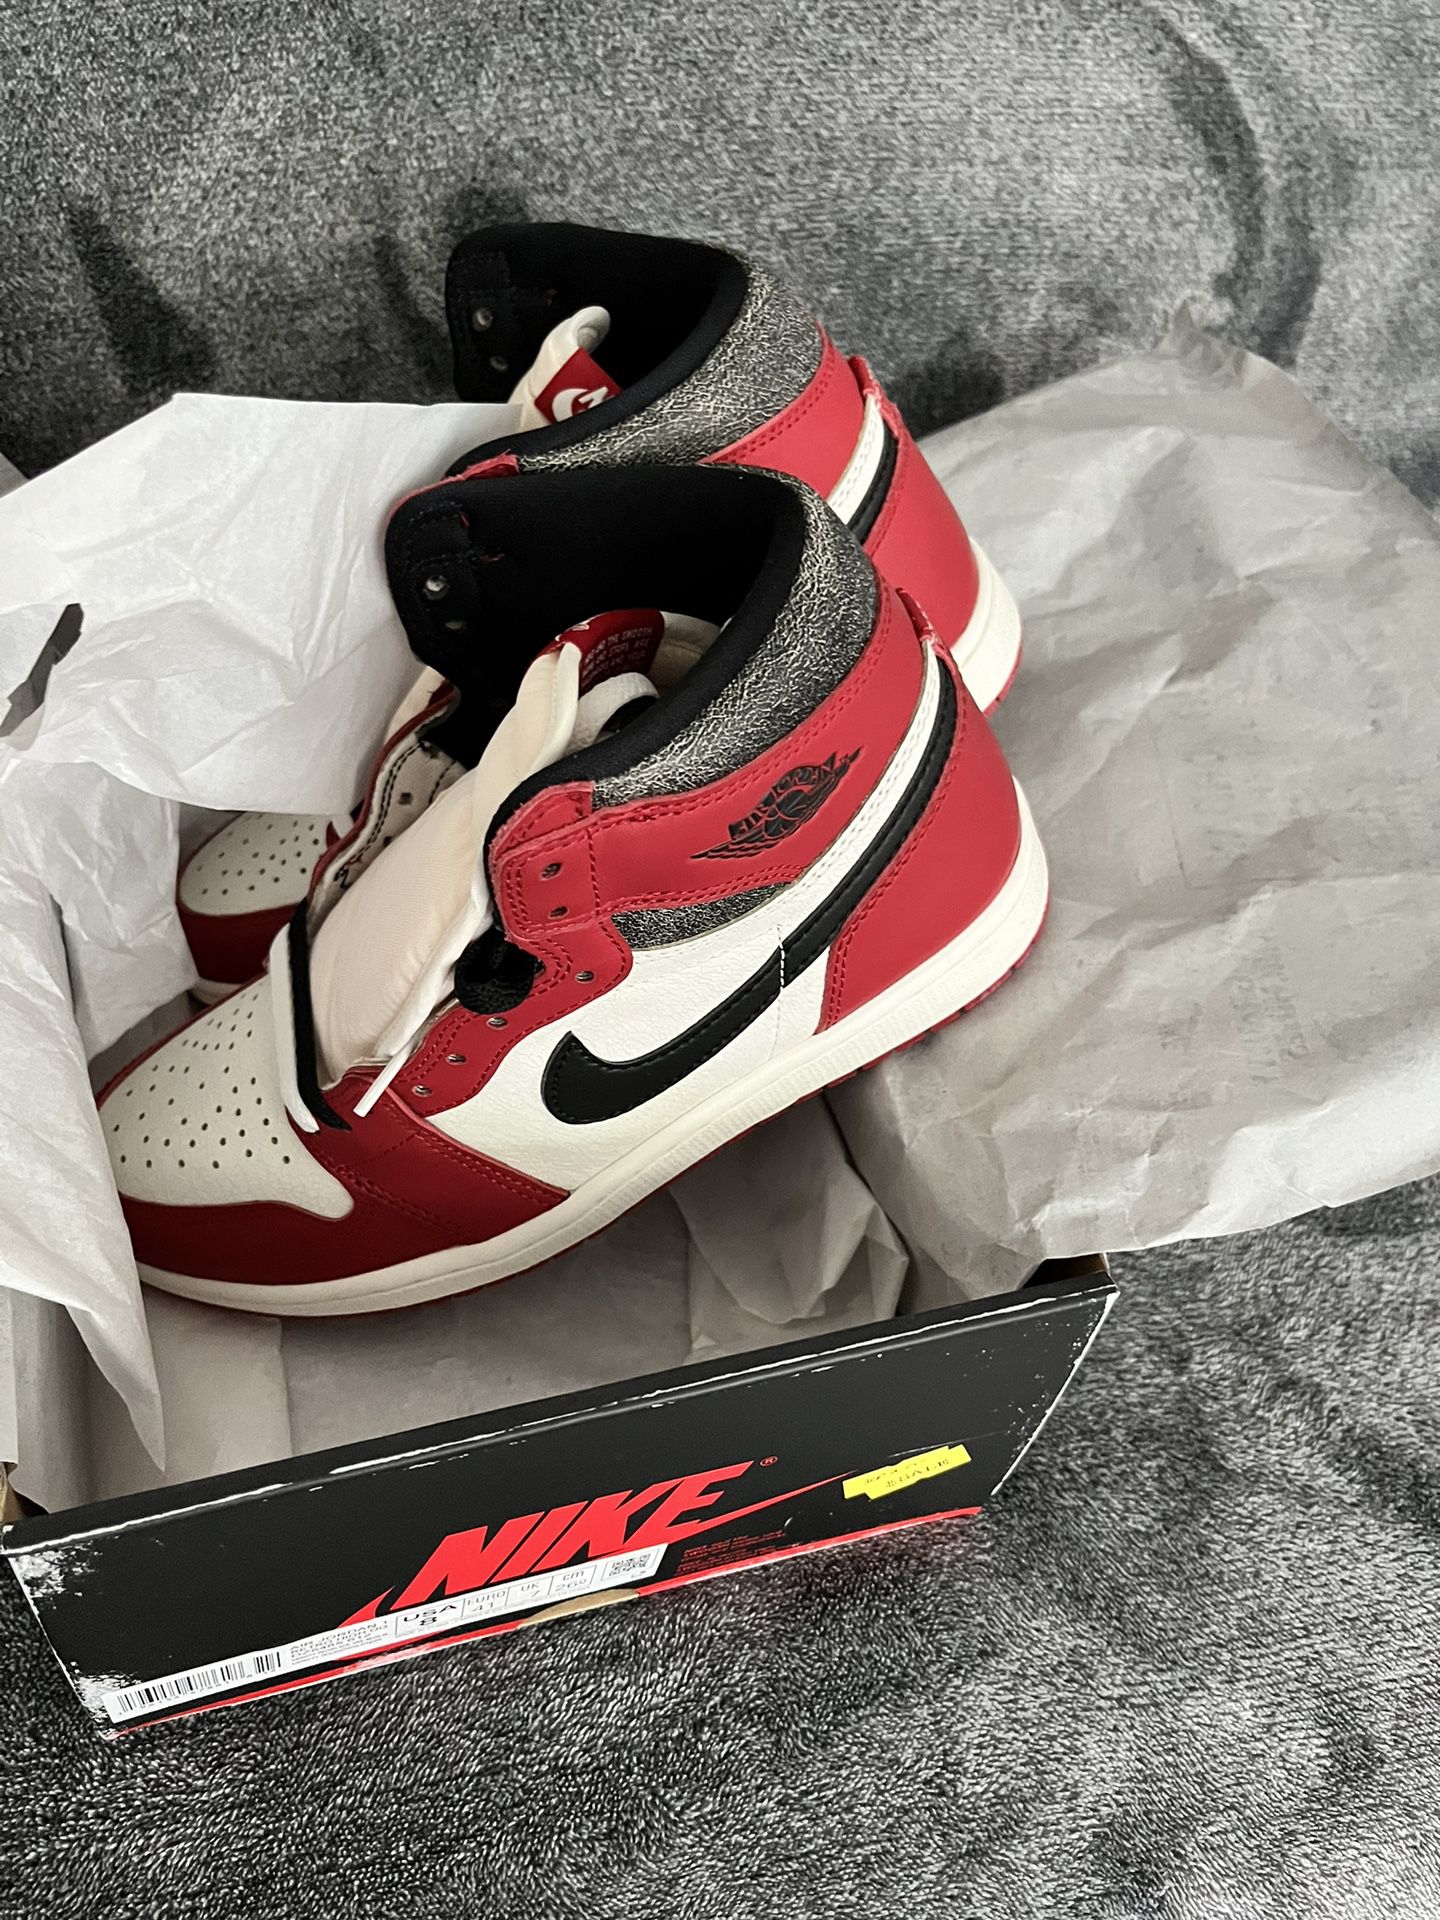 Jordan 1 Chicago Lost and found 